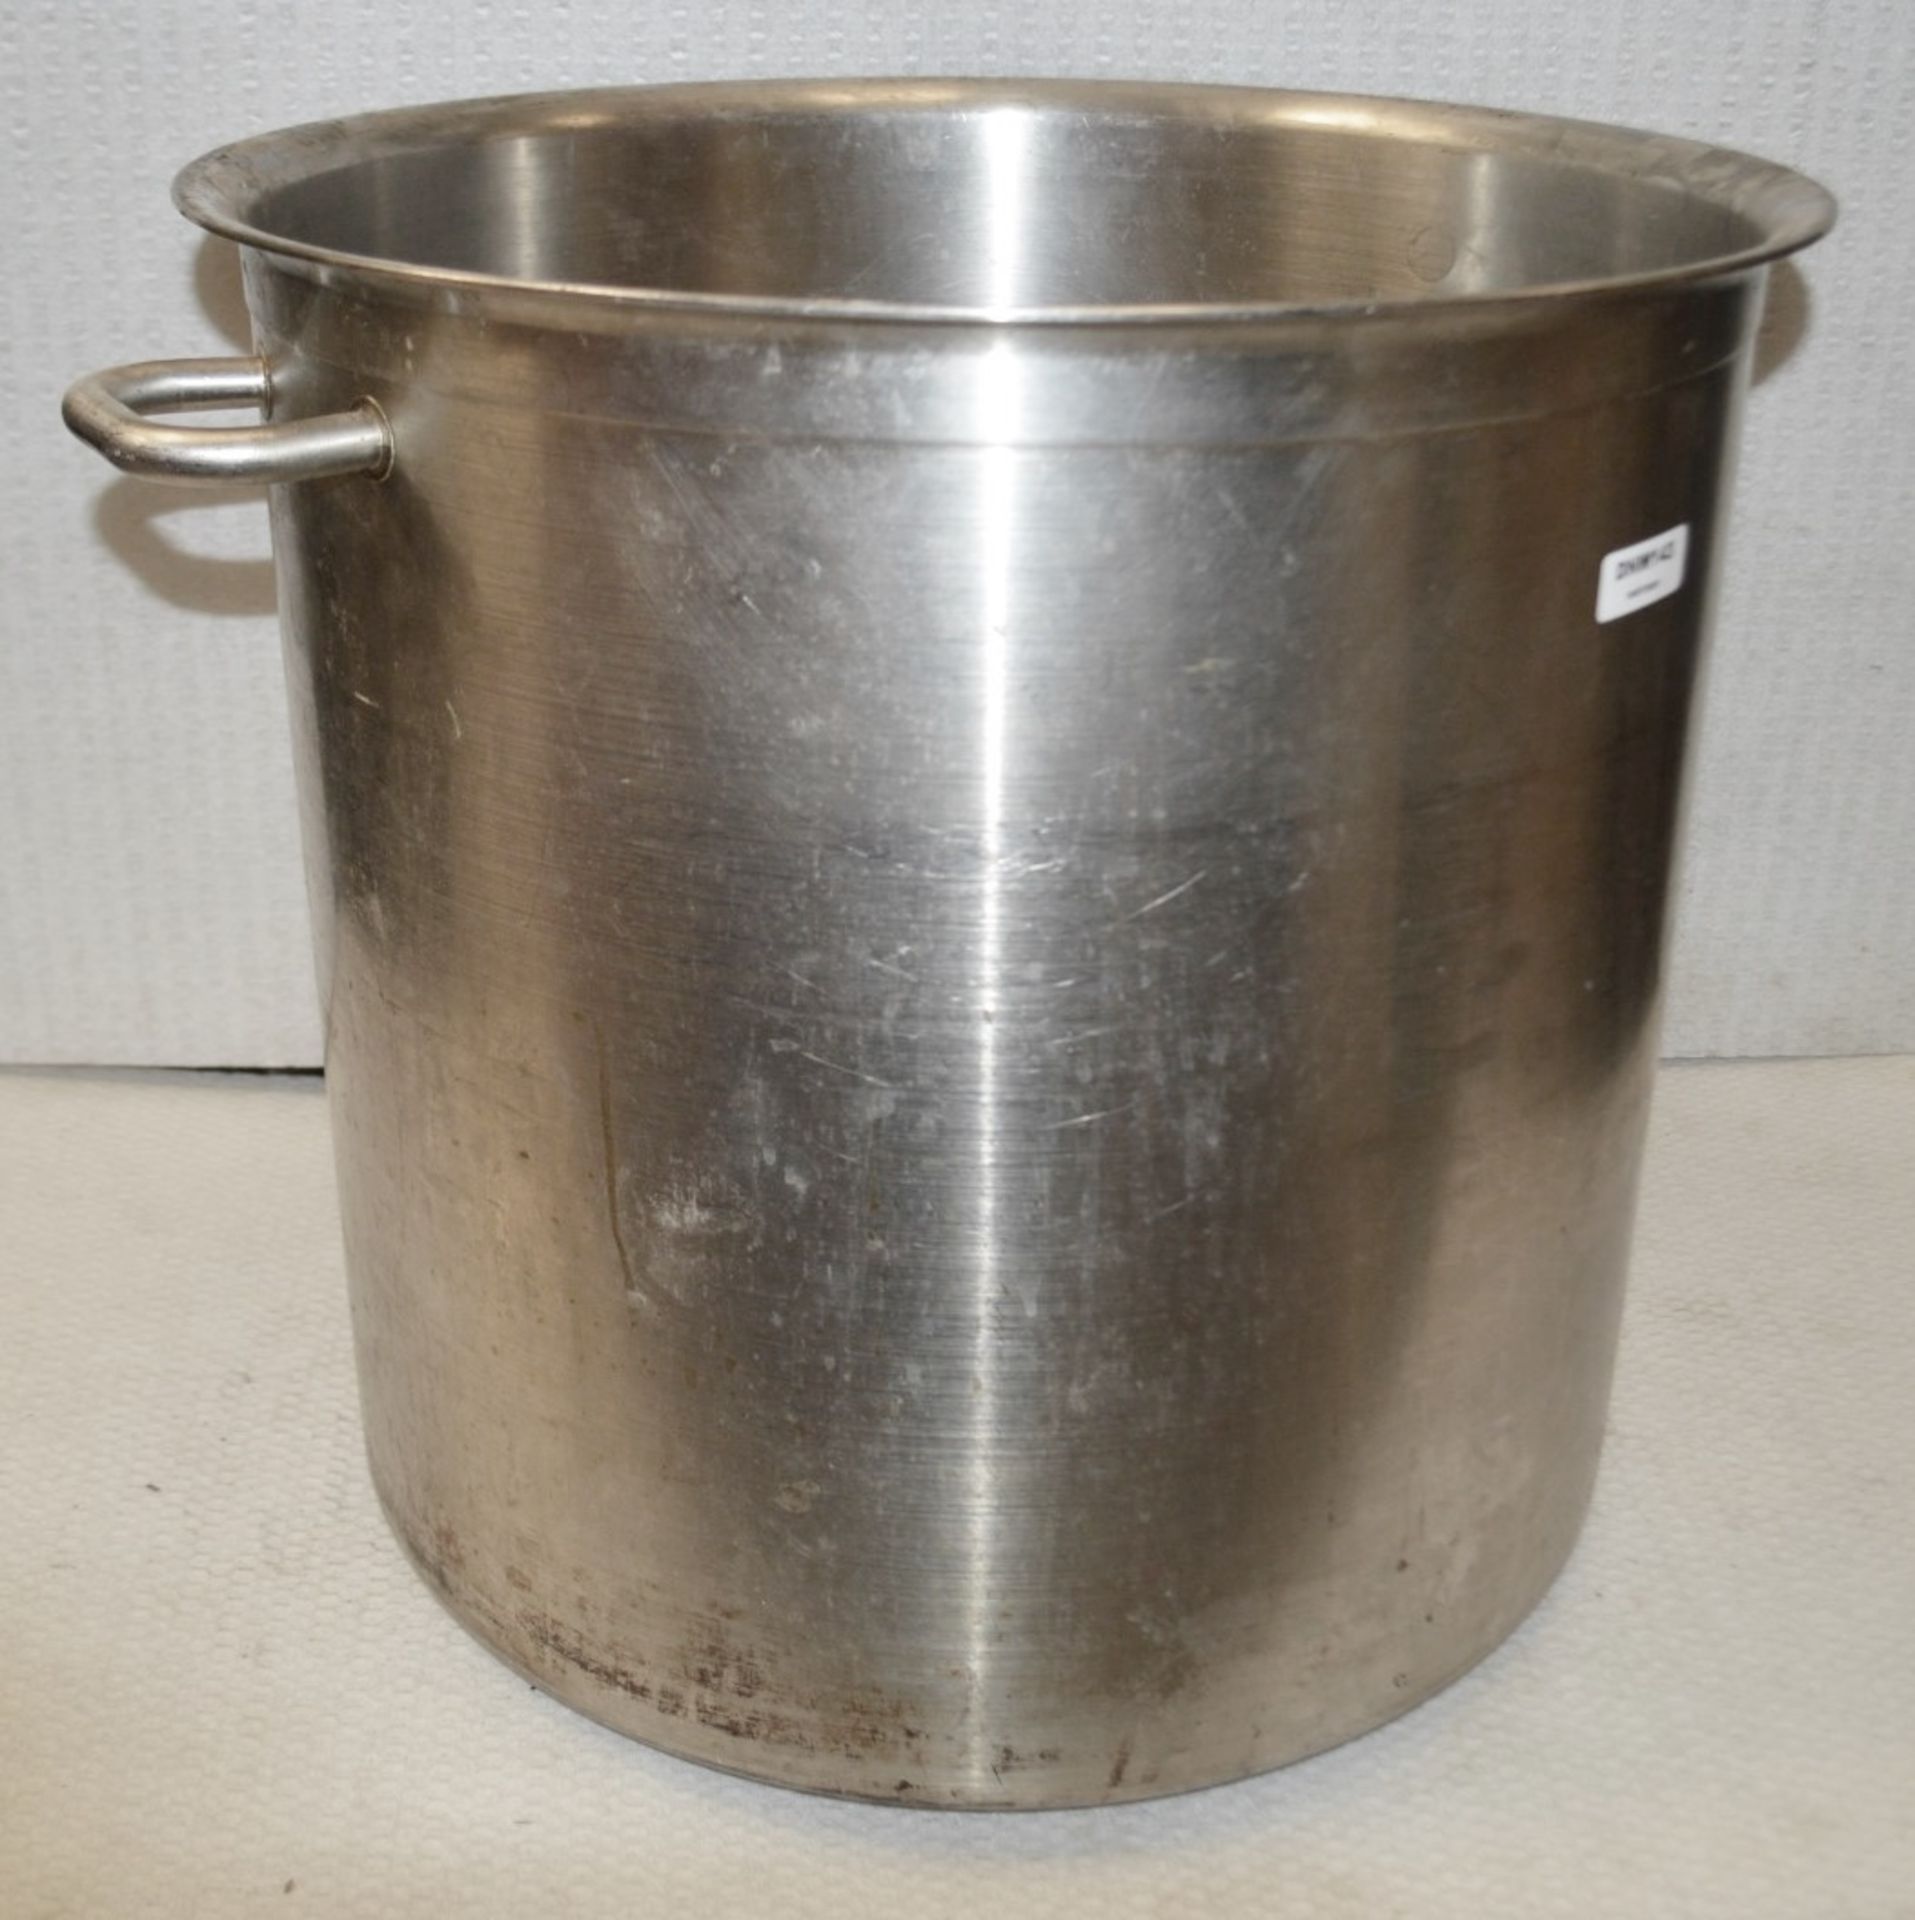 1 x Large Stainless Steel Cooking Pan - Dimensions: L54 x W54 x D50cm - Recently Removed From a - Image 3 of 3